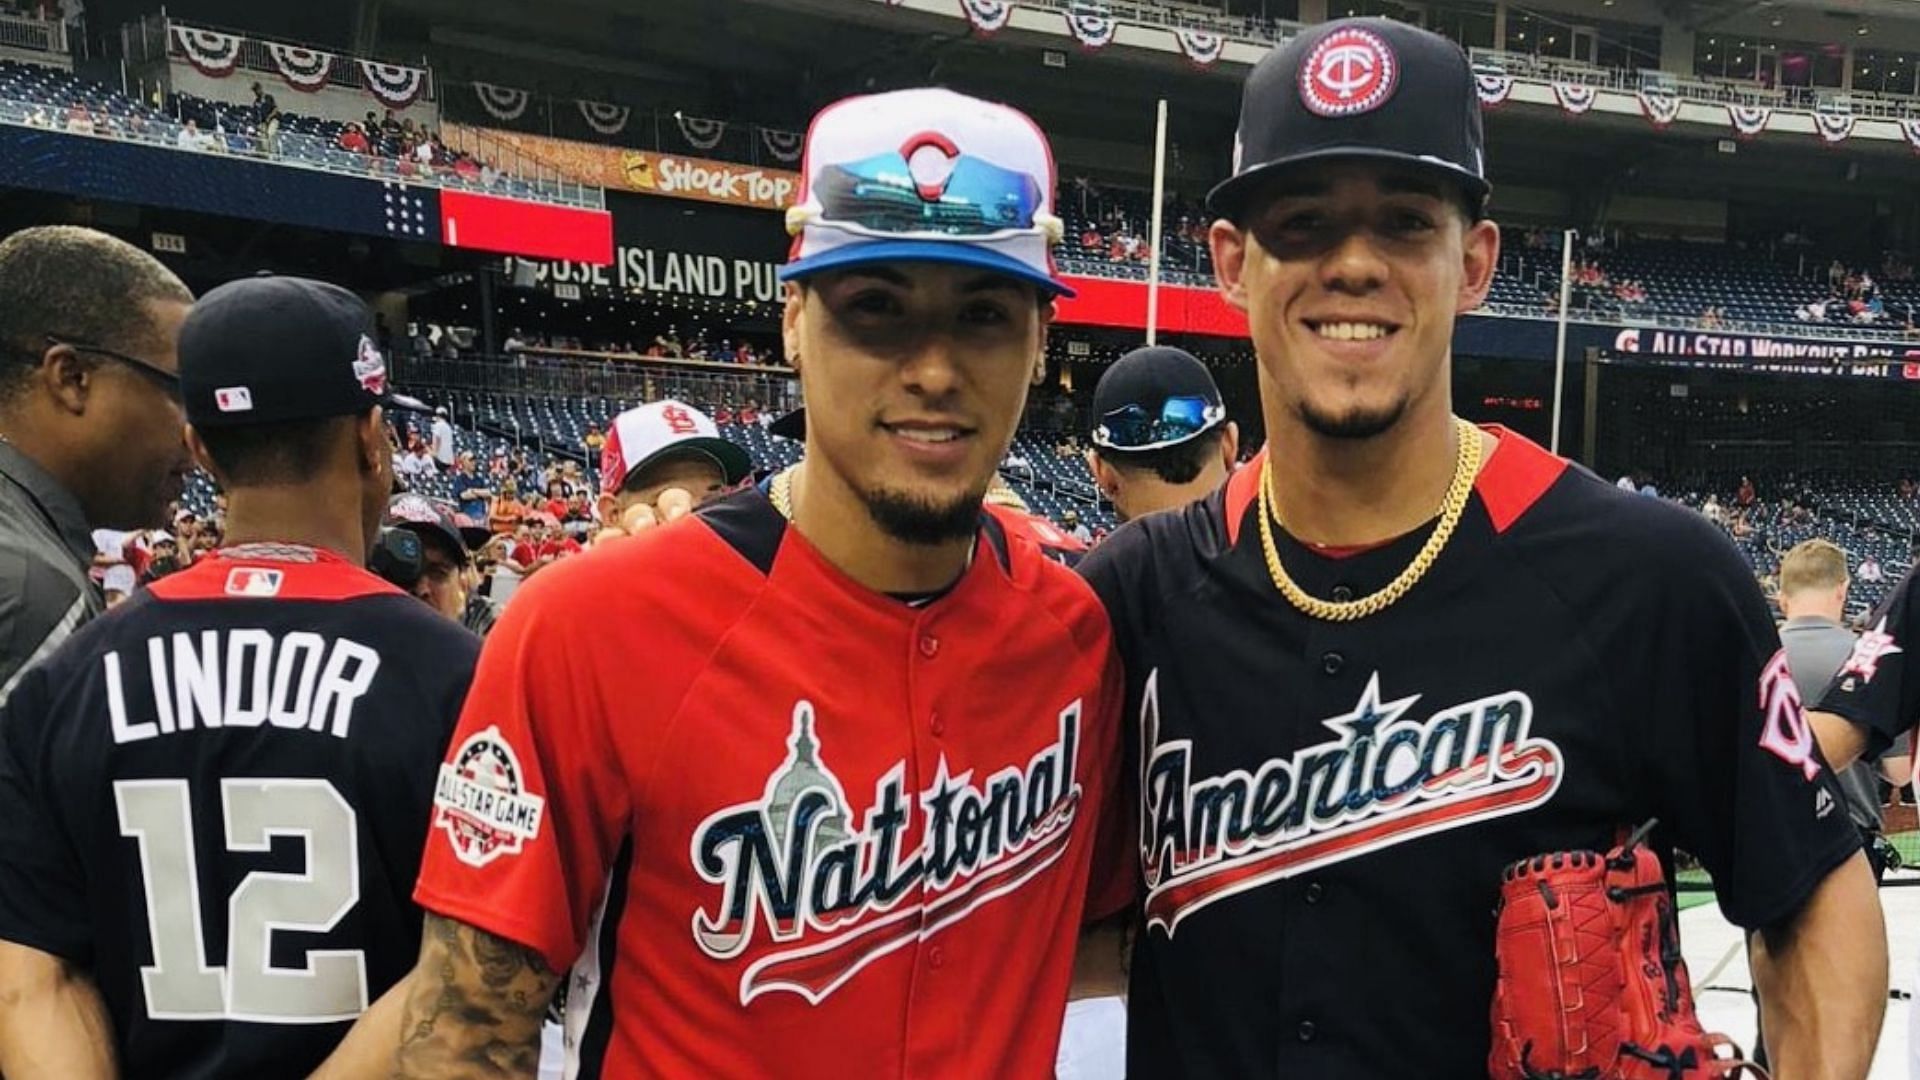 Newlybros Game: Cubs Javy Baez and Twins Jose Berrios Test